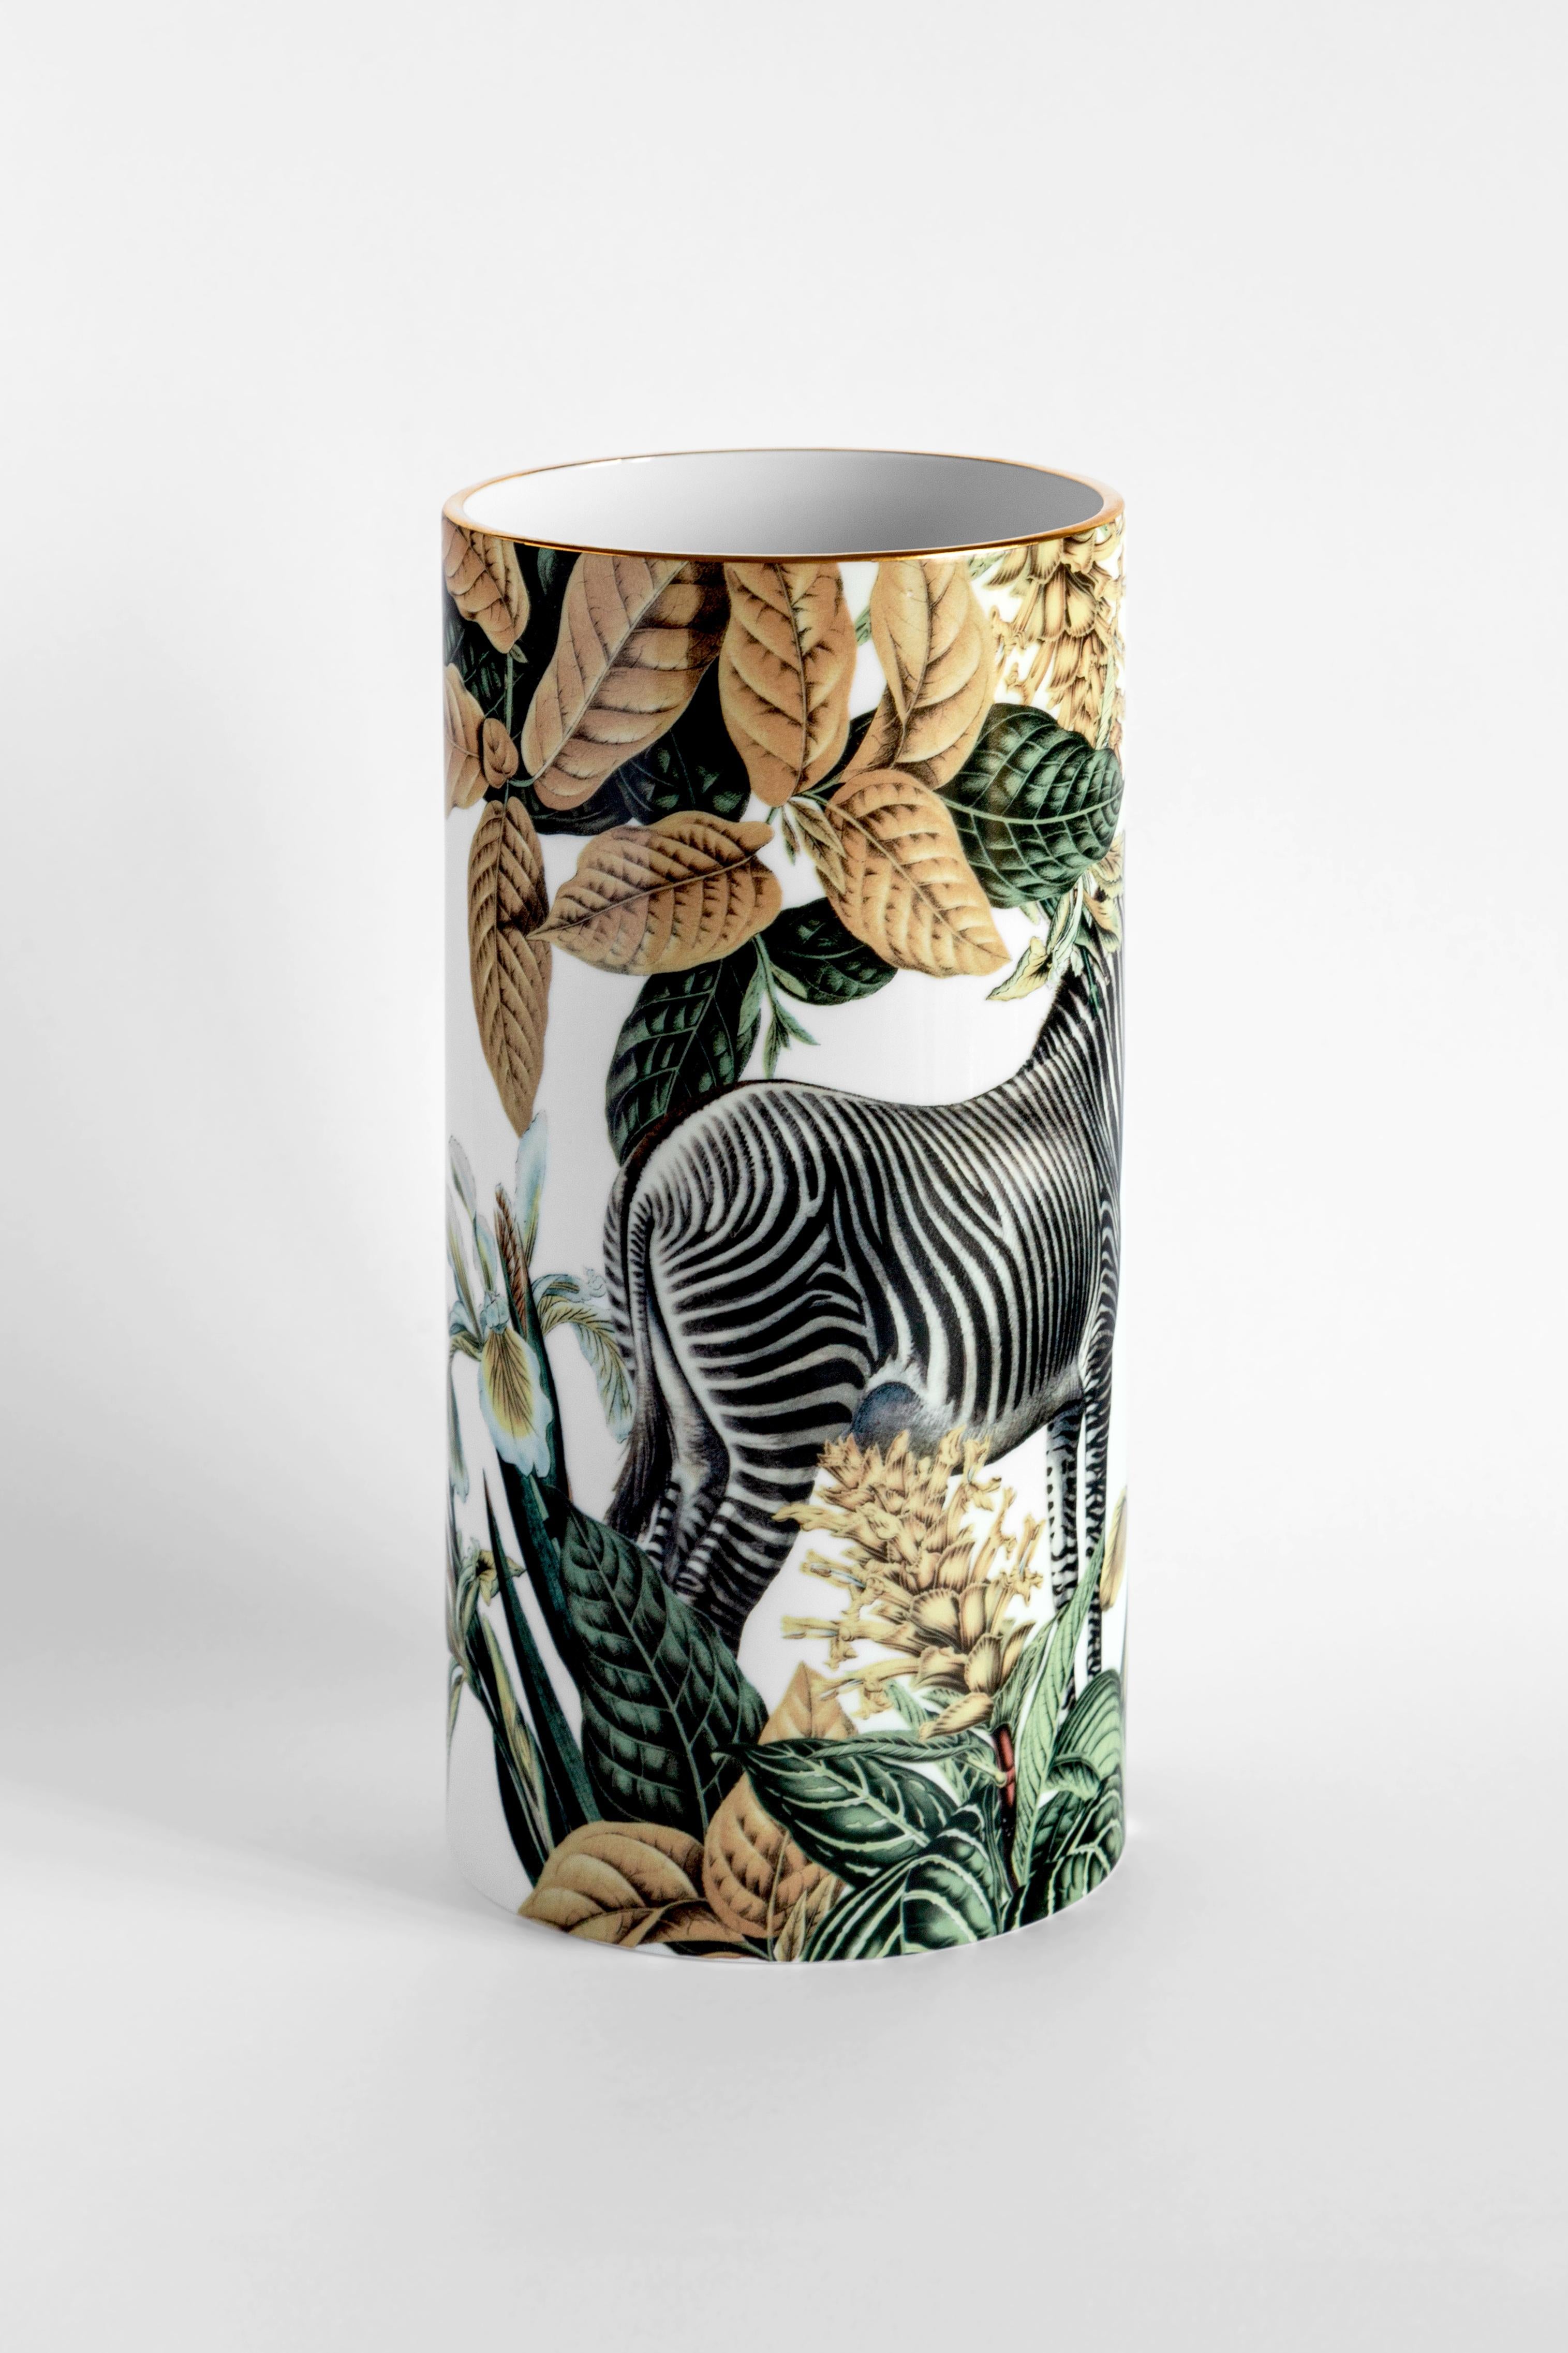 Stunning hues and vibrant colors dynamically dance and come together in this vase by Vito Nesta depicting a superbly detailed African zebra surrounded by luscious gold, green, and white vegetation. The gorgeous burst of colors infusing charm and